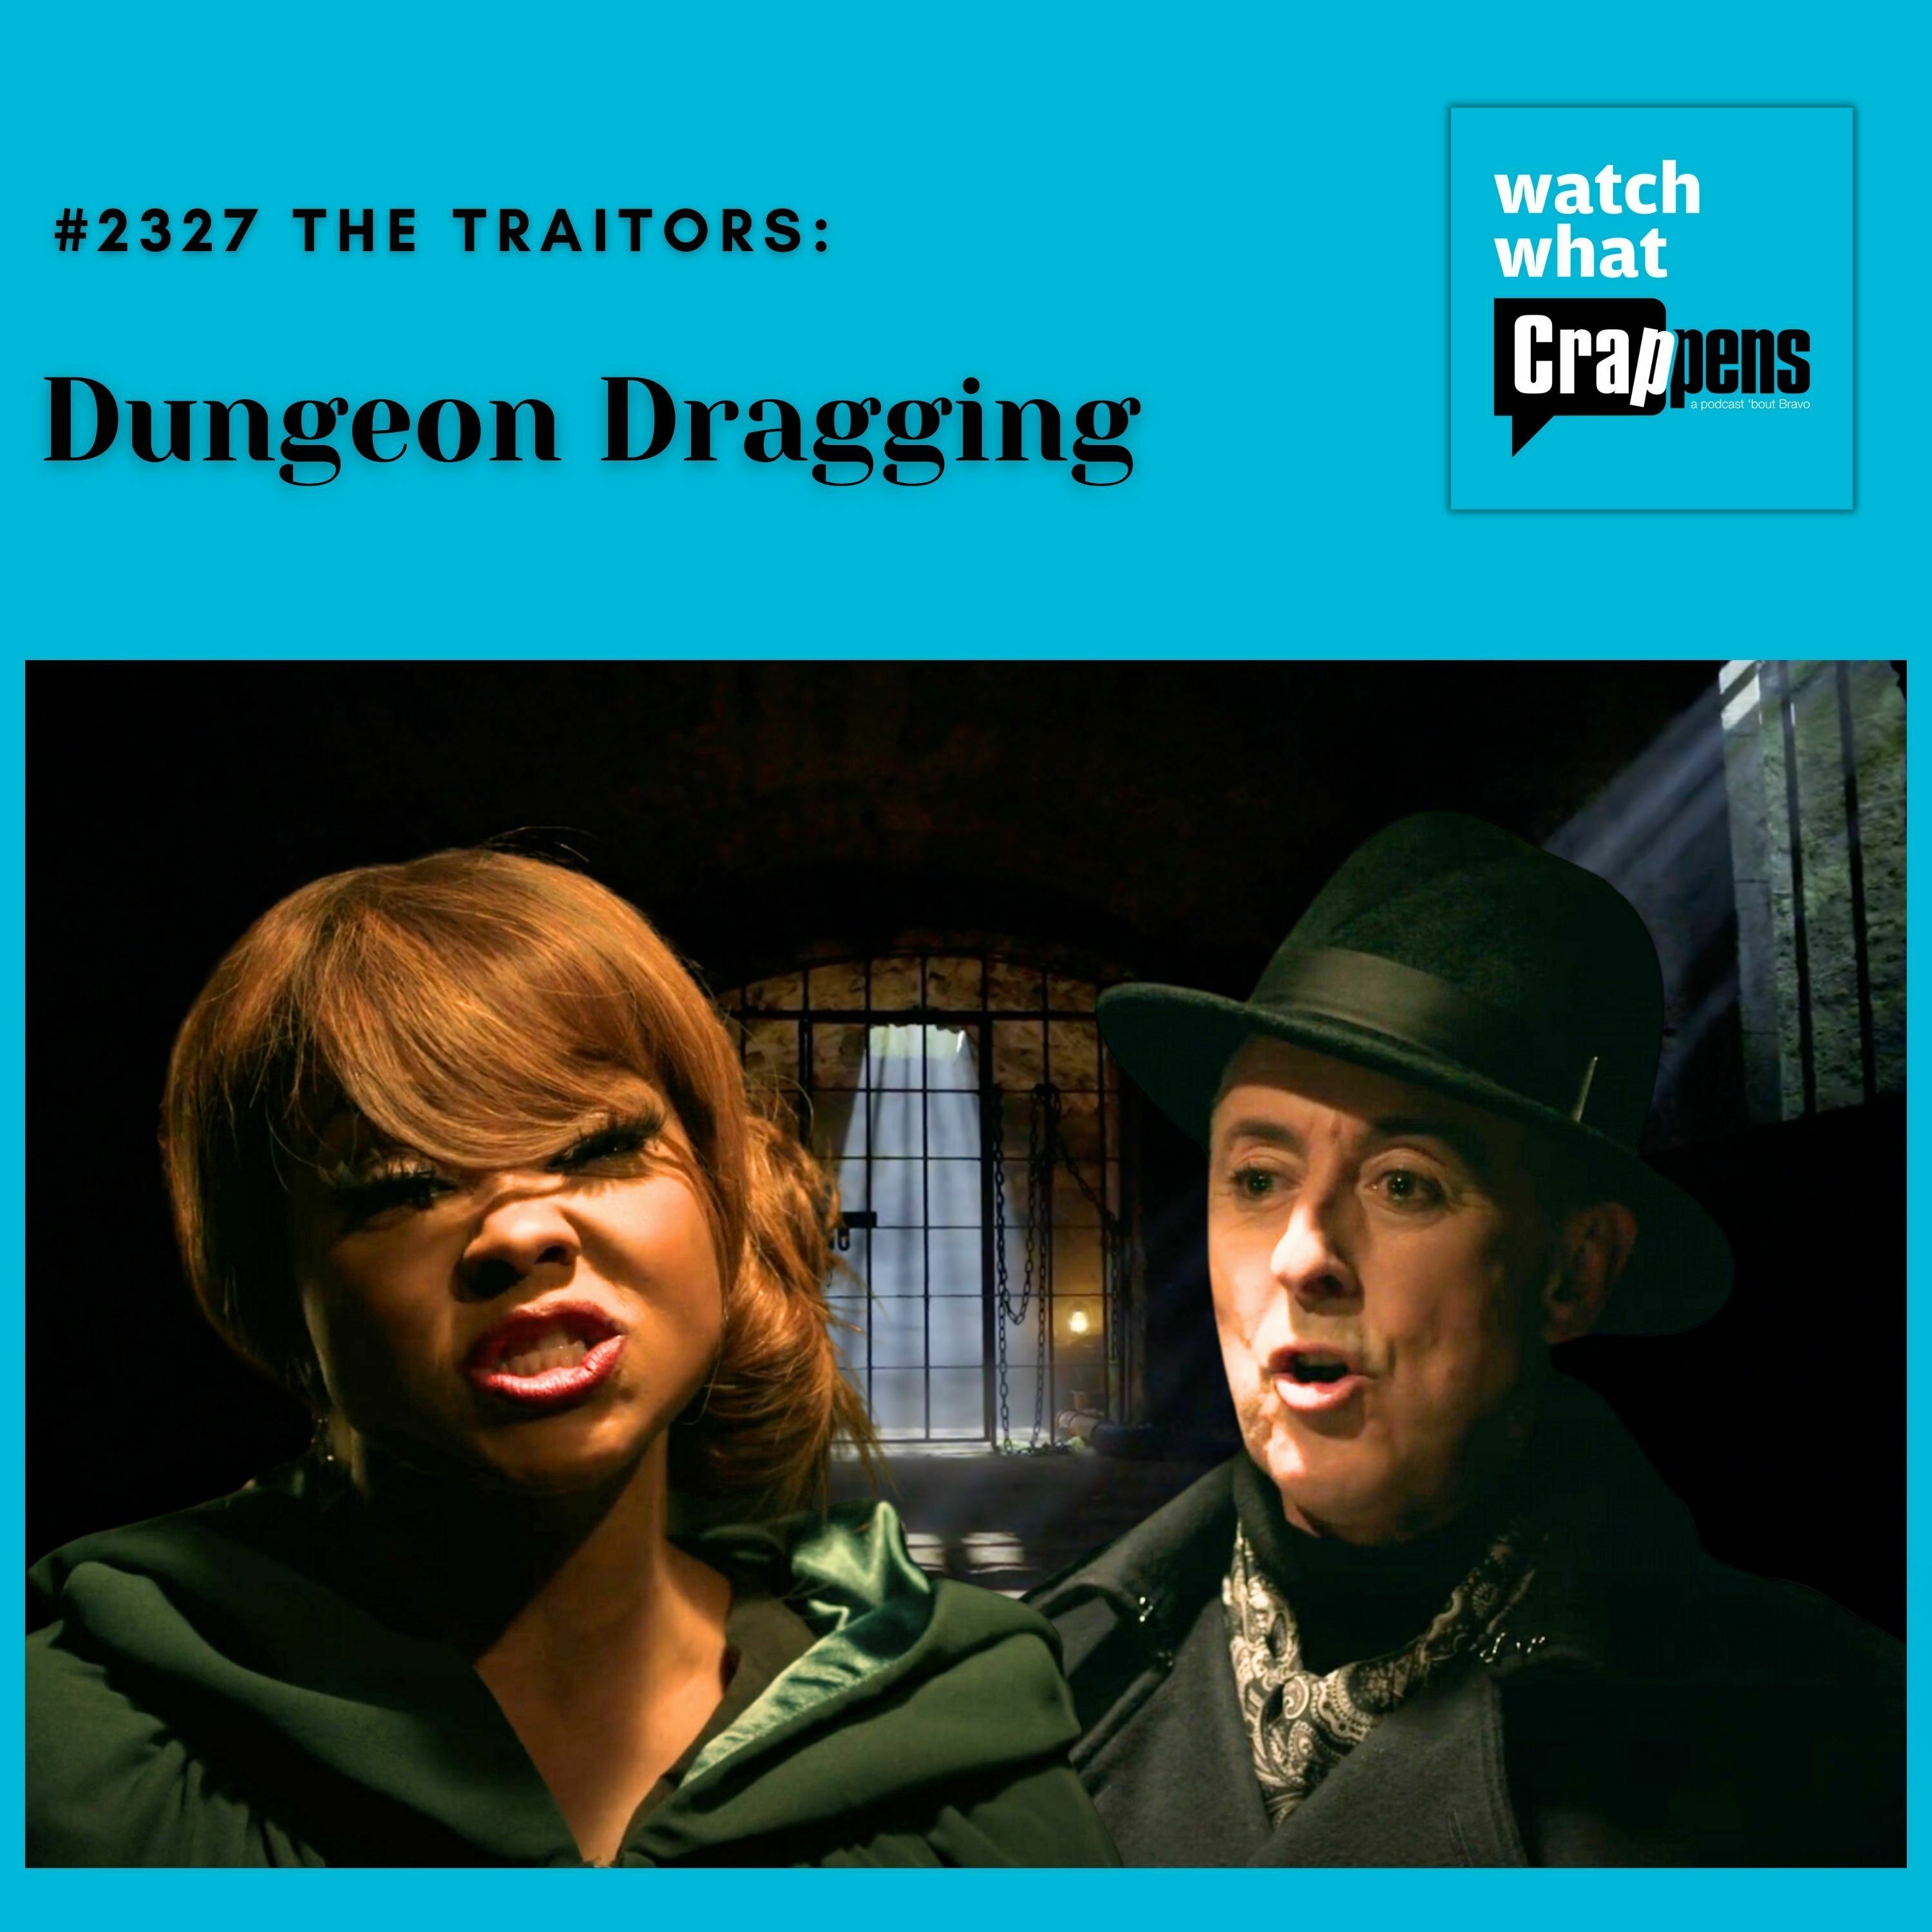 #2327 The Traitors: Dungeon Dragging